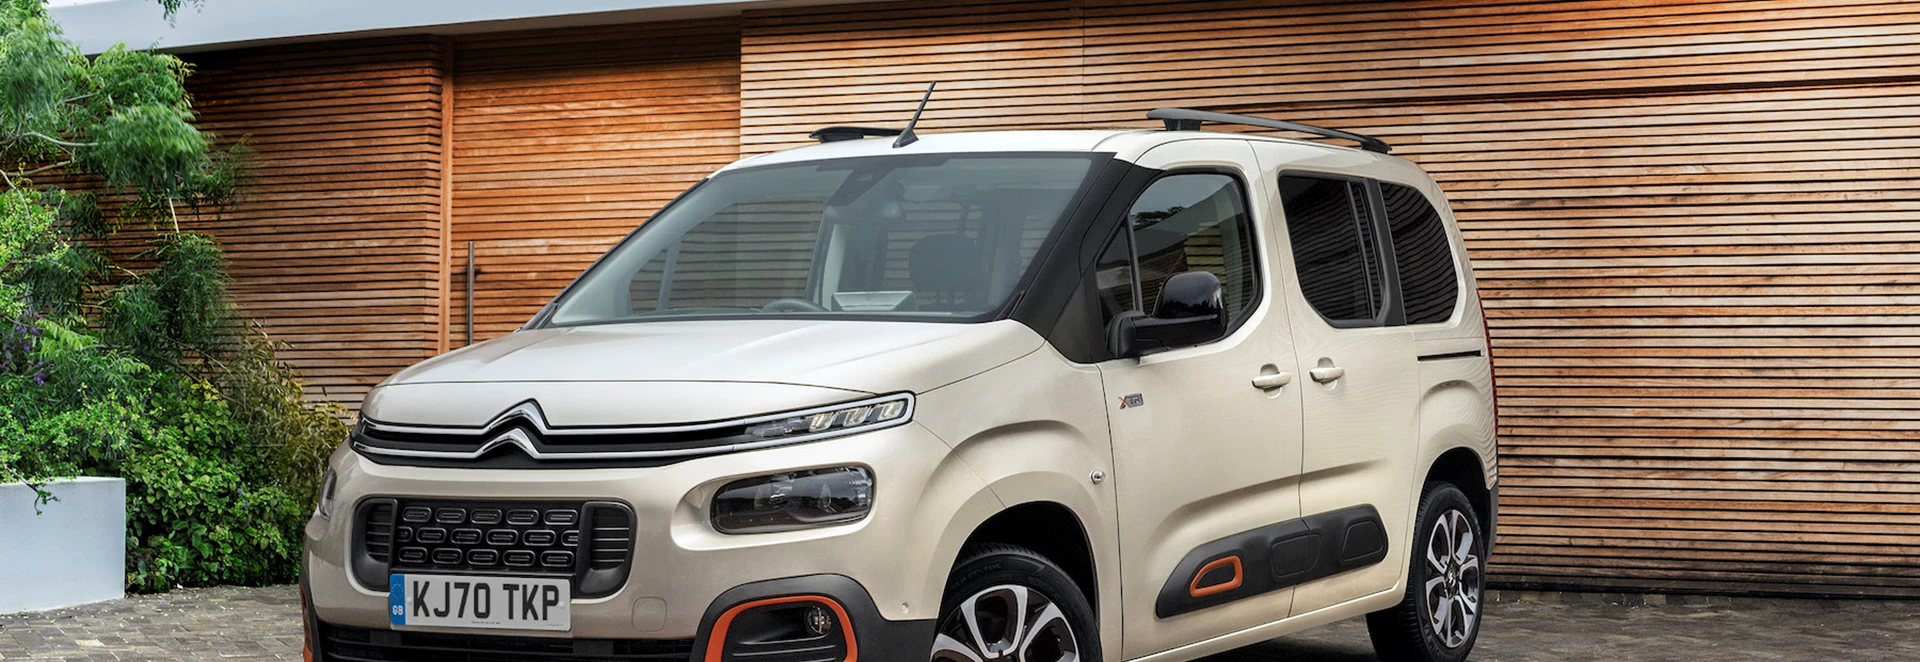 5 things you need to know about the Citroen Berlingo 